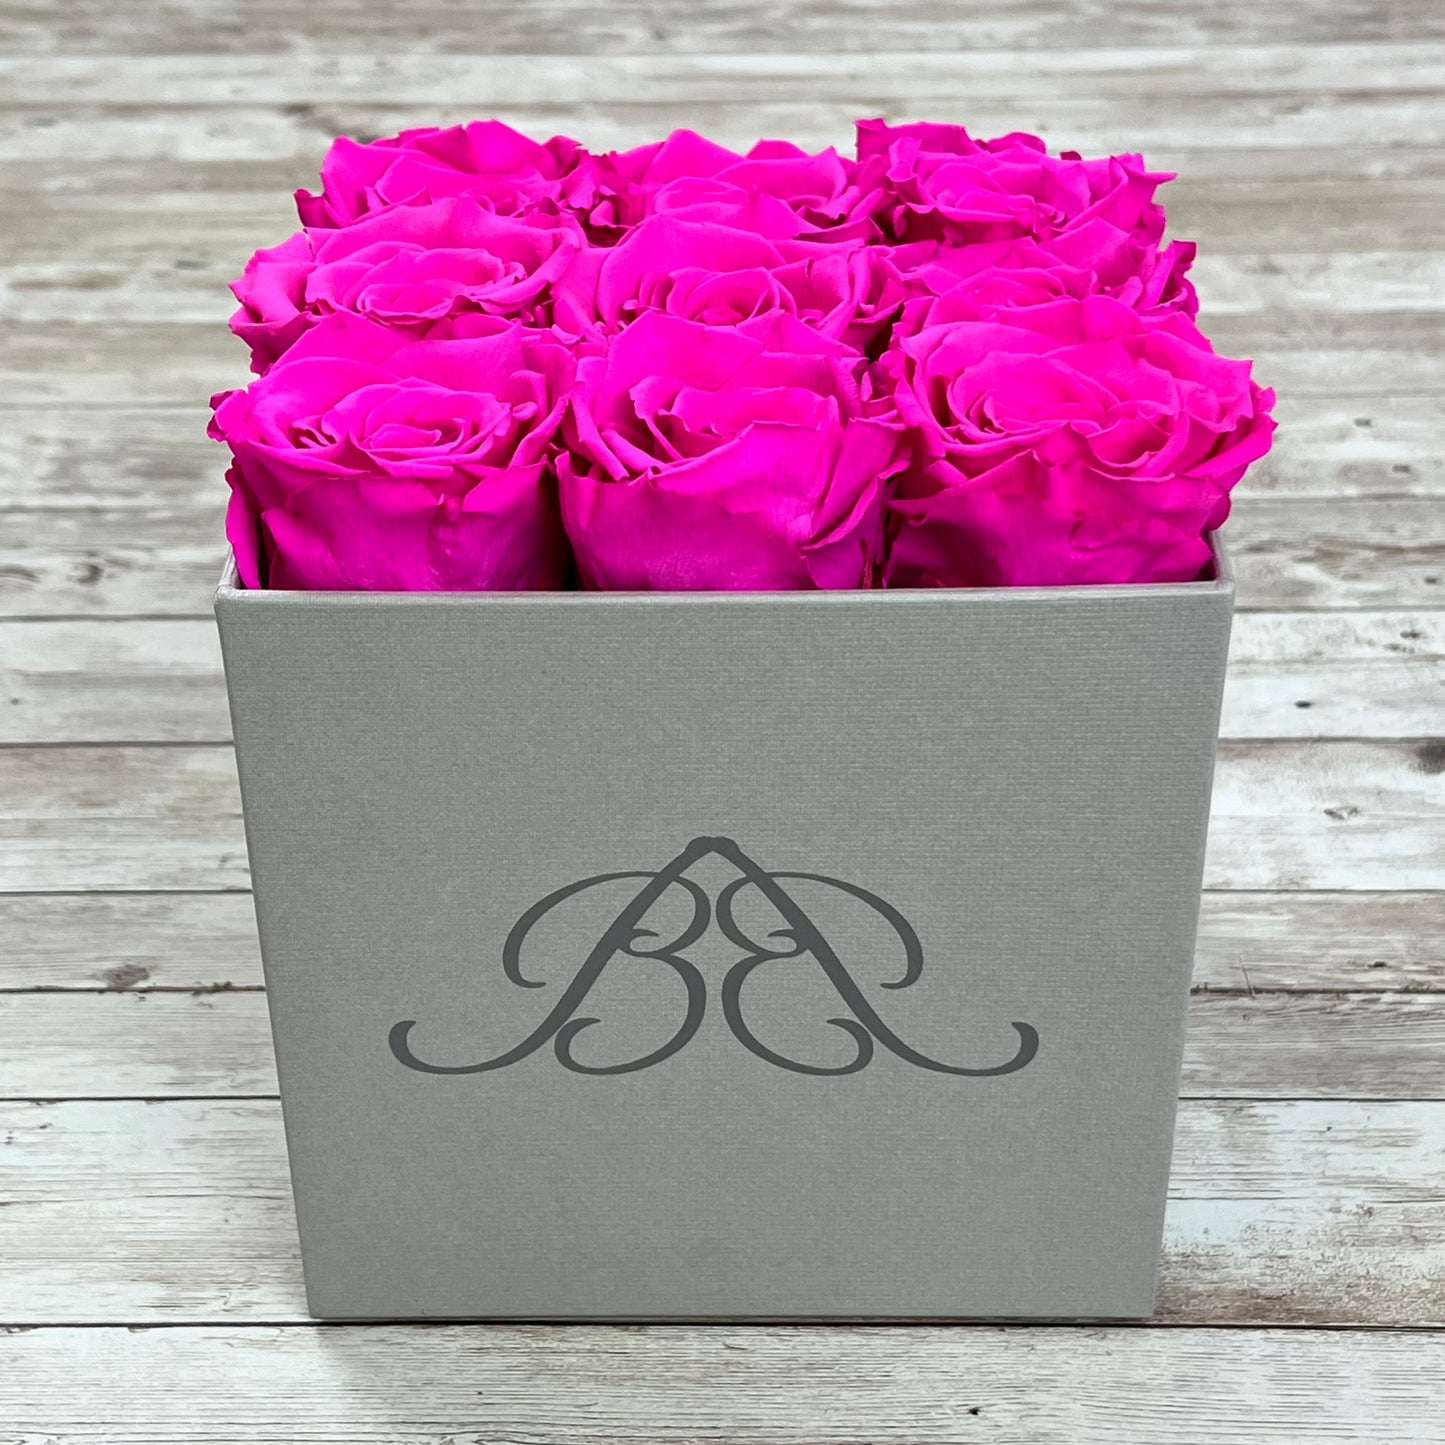 Grey Square Infinity Rose Box - Infinity Roses - Shocking Pink One Year Roses - Square Box of Roses - Rose Colours divider-Shocking Pink